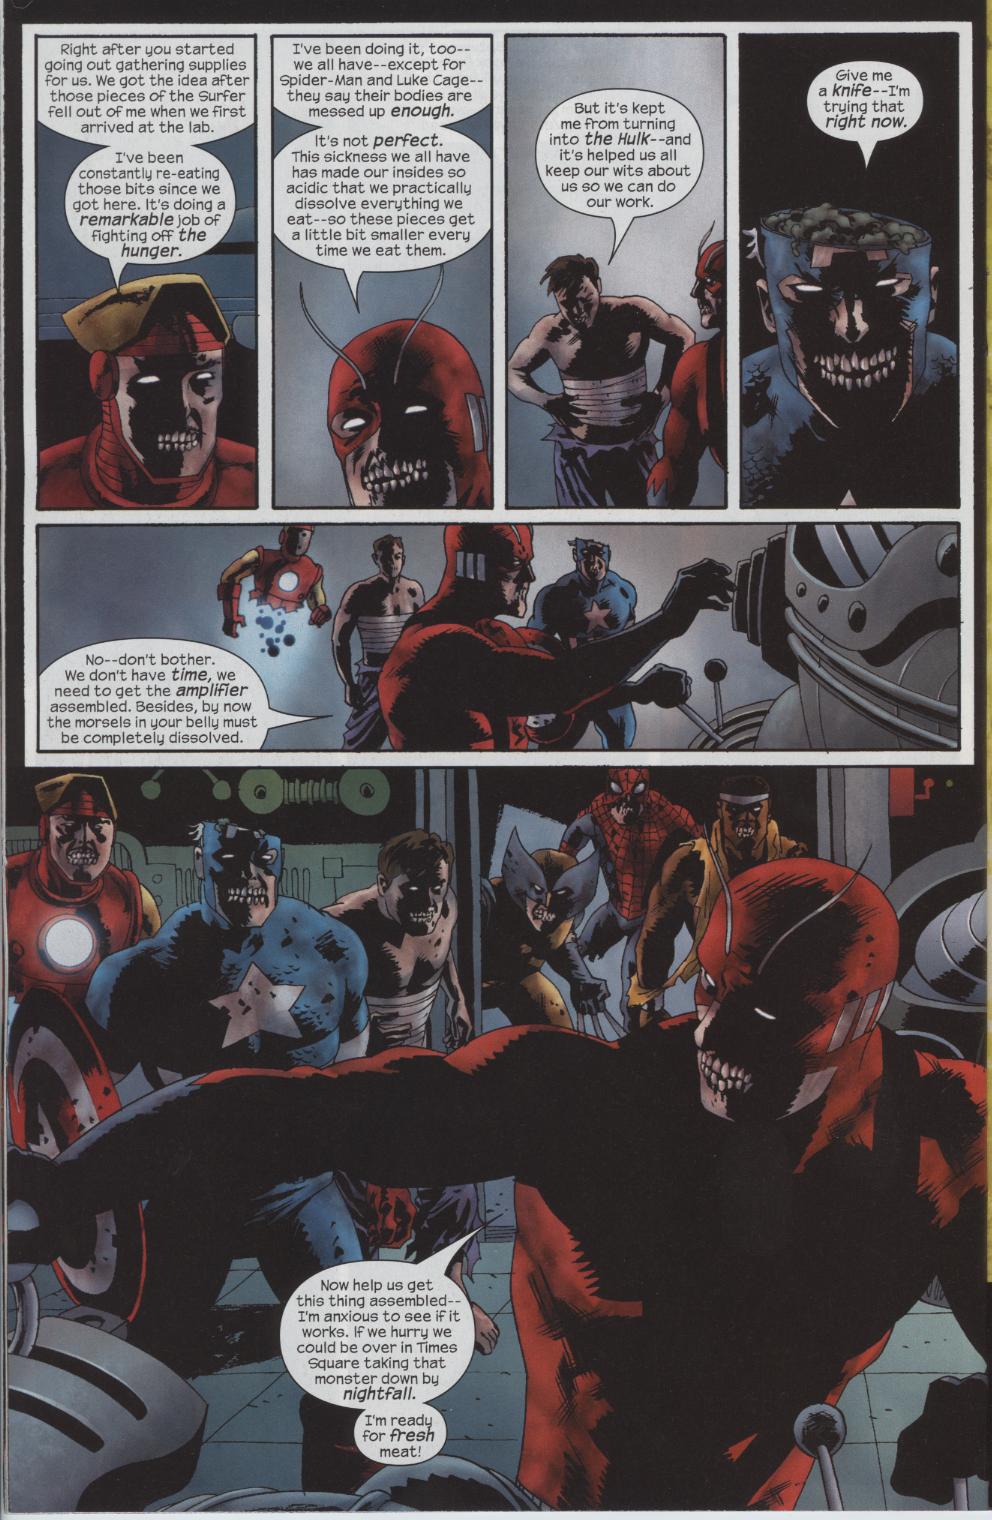 Marvel Zombies 1. Part 4 of 5